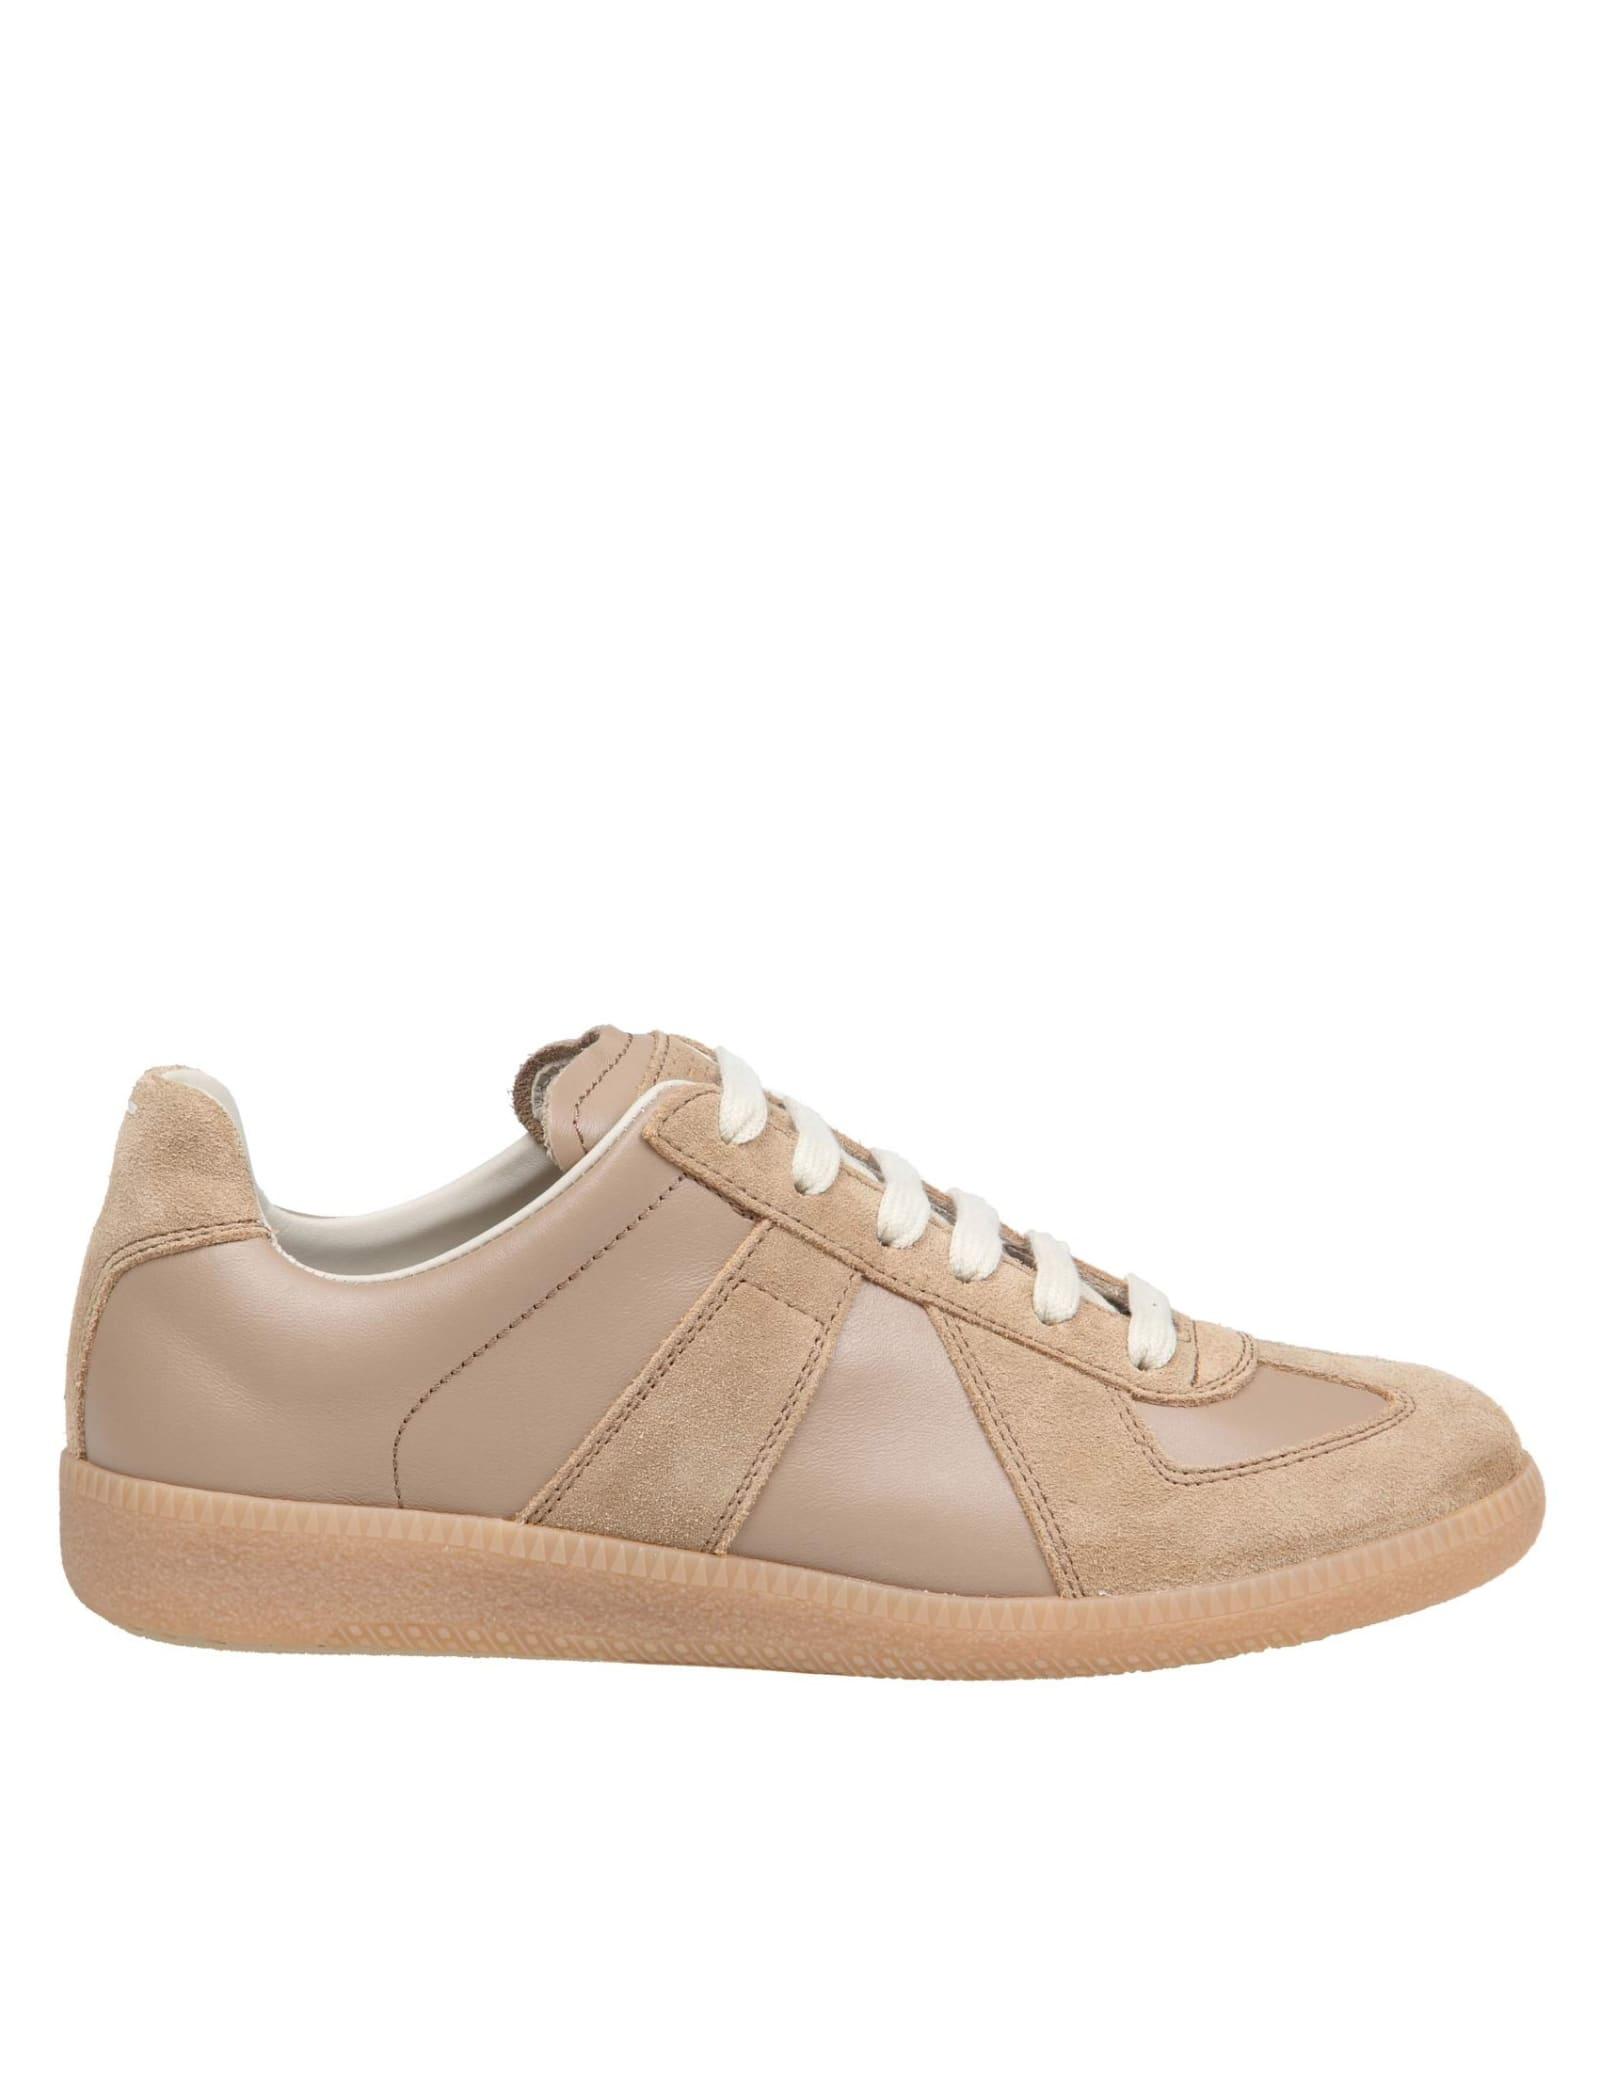 Maison Margiela Replica Sneakers In Leather And Suede in Brown for Men |  Lyst UK